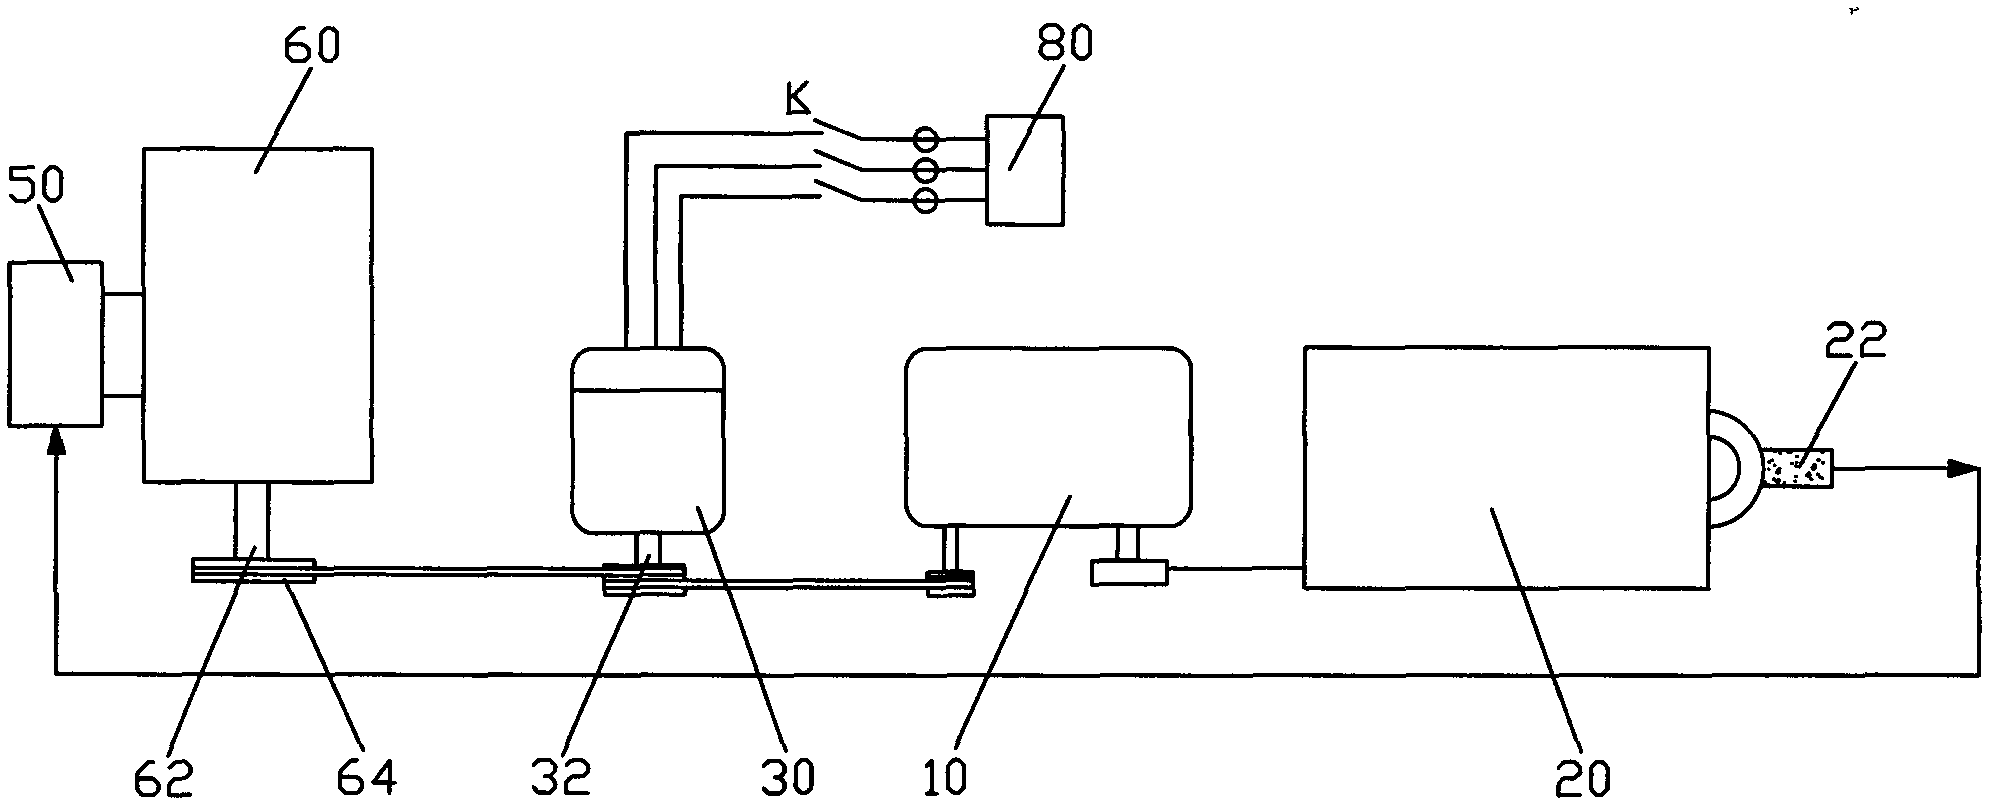 Uninterrupted motive power system for oil pumping machine in oil field